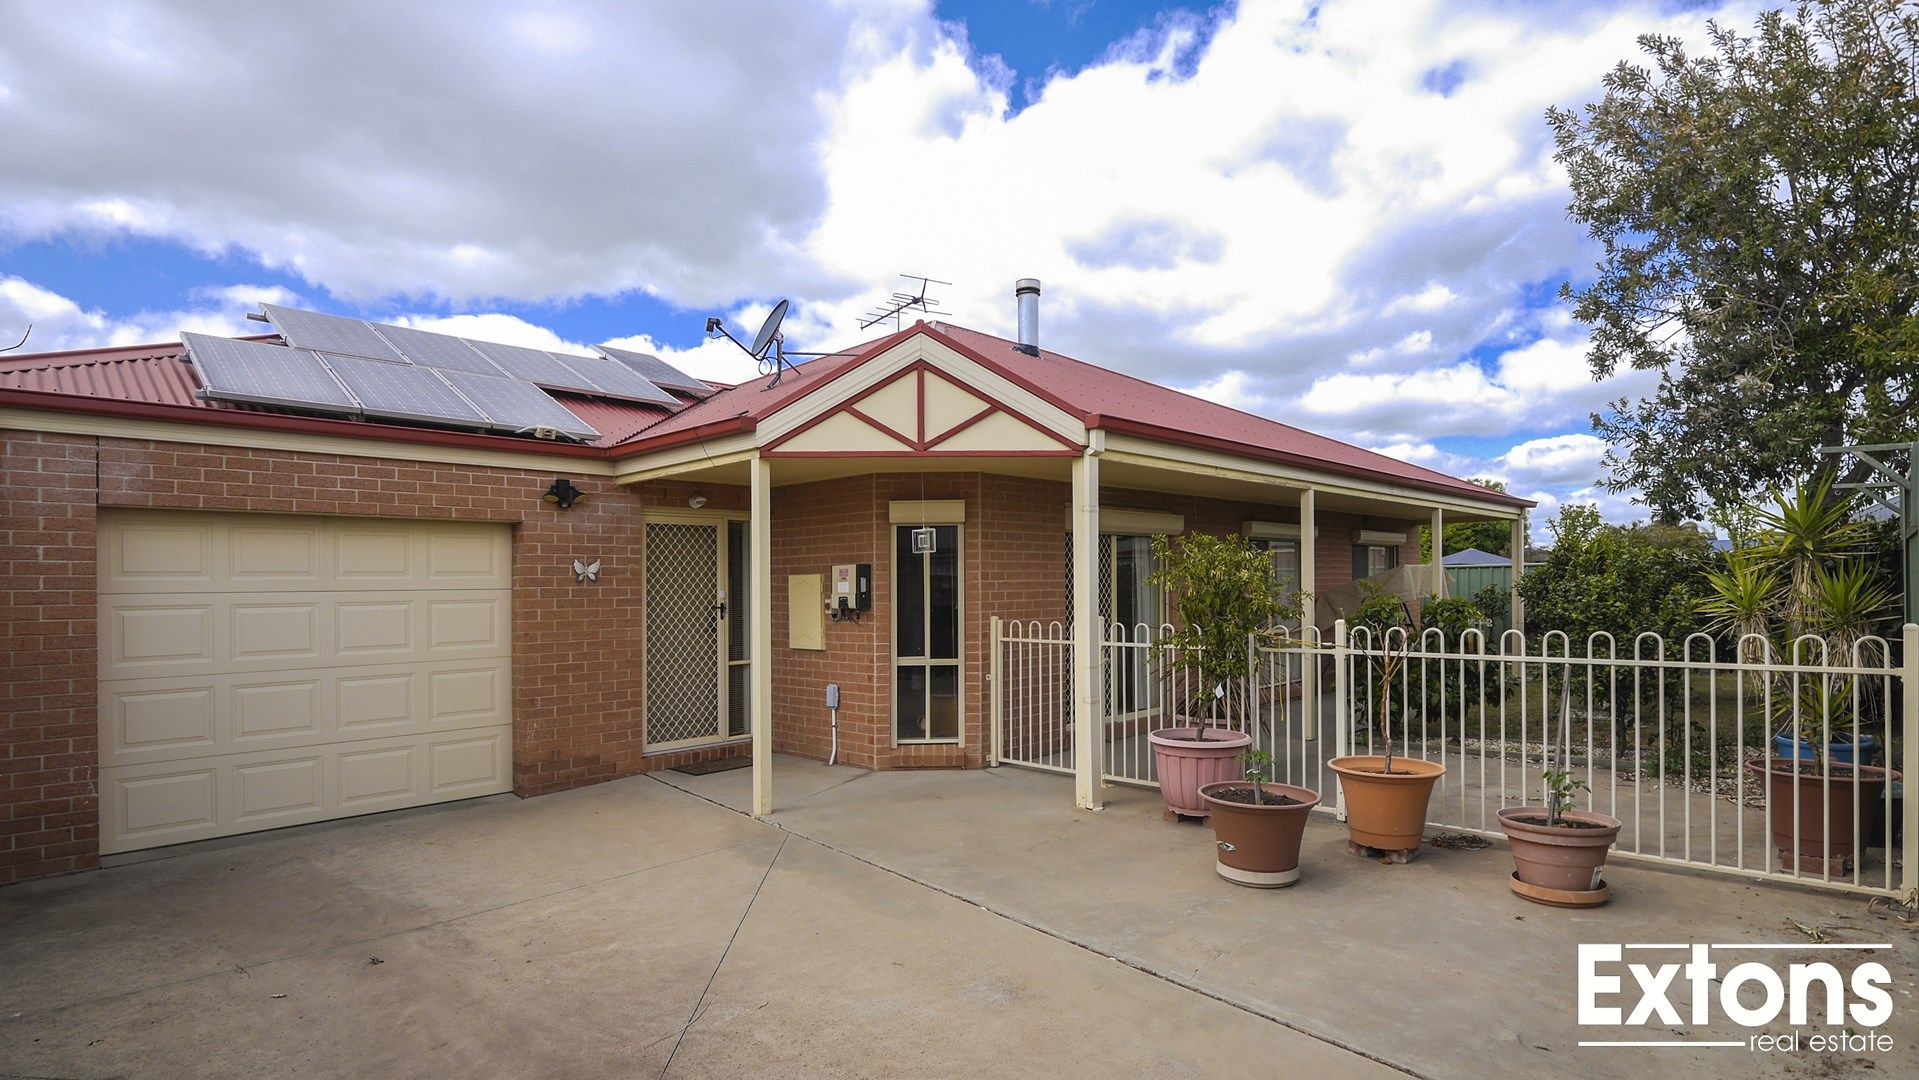 2 bedrooms Apartment / Unit / Flat in 2/29 Madden Drive YARRAWONGA VIC, 3730